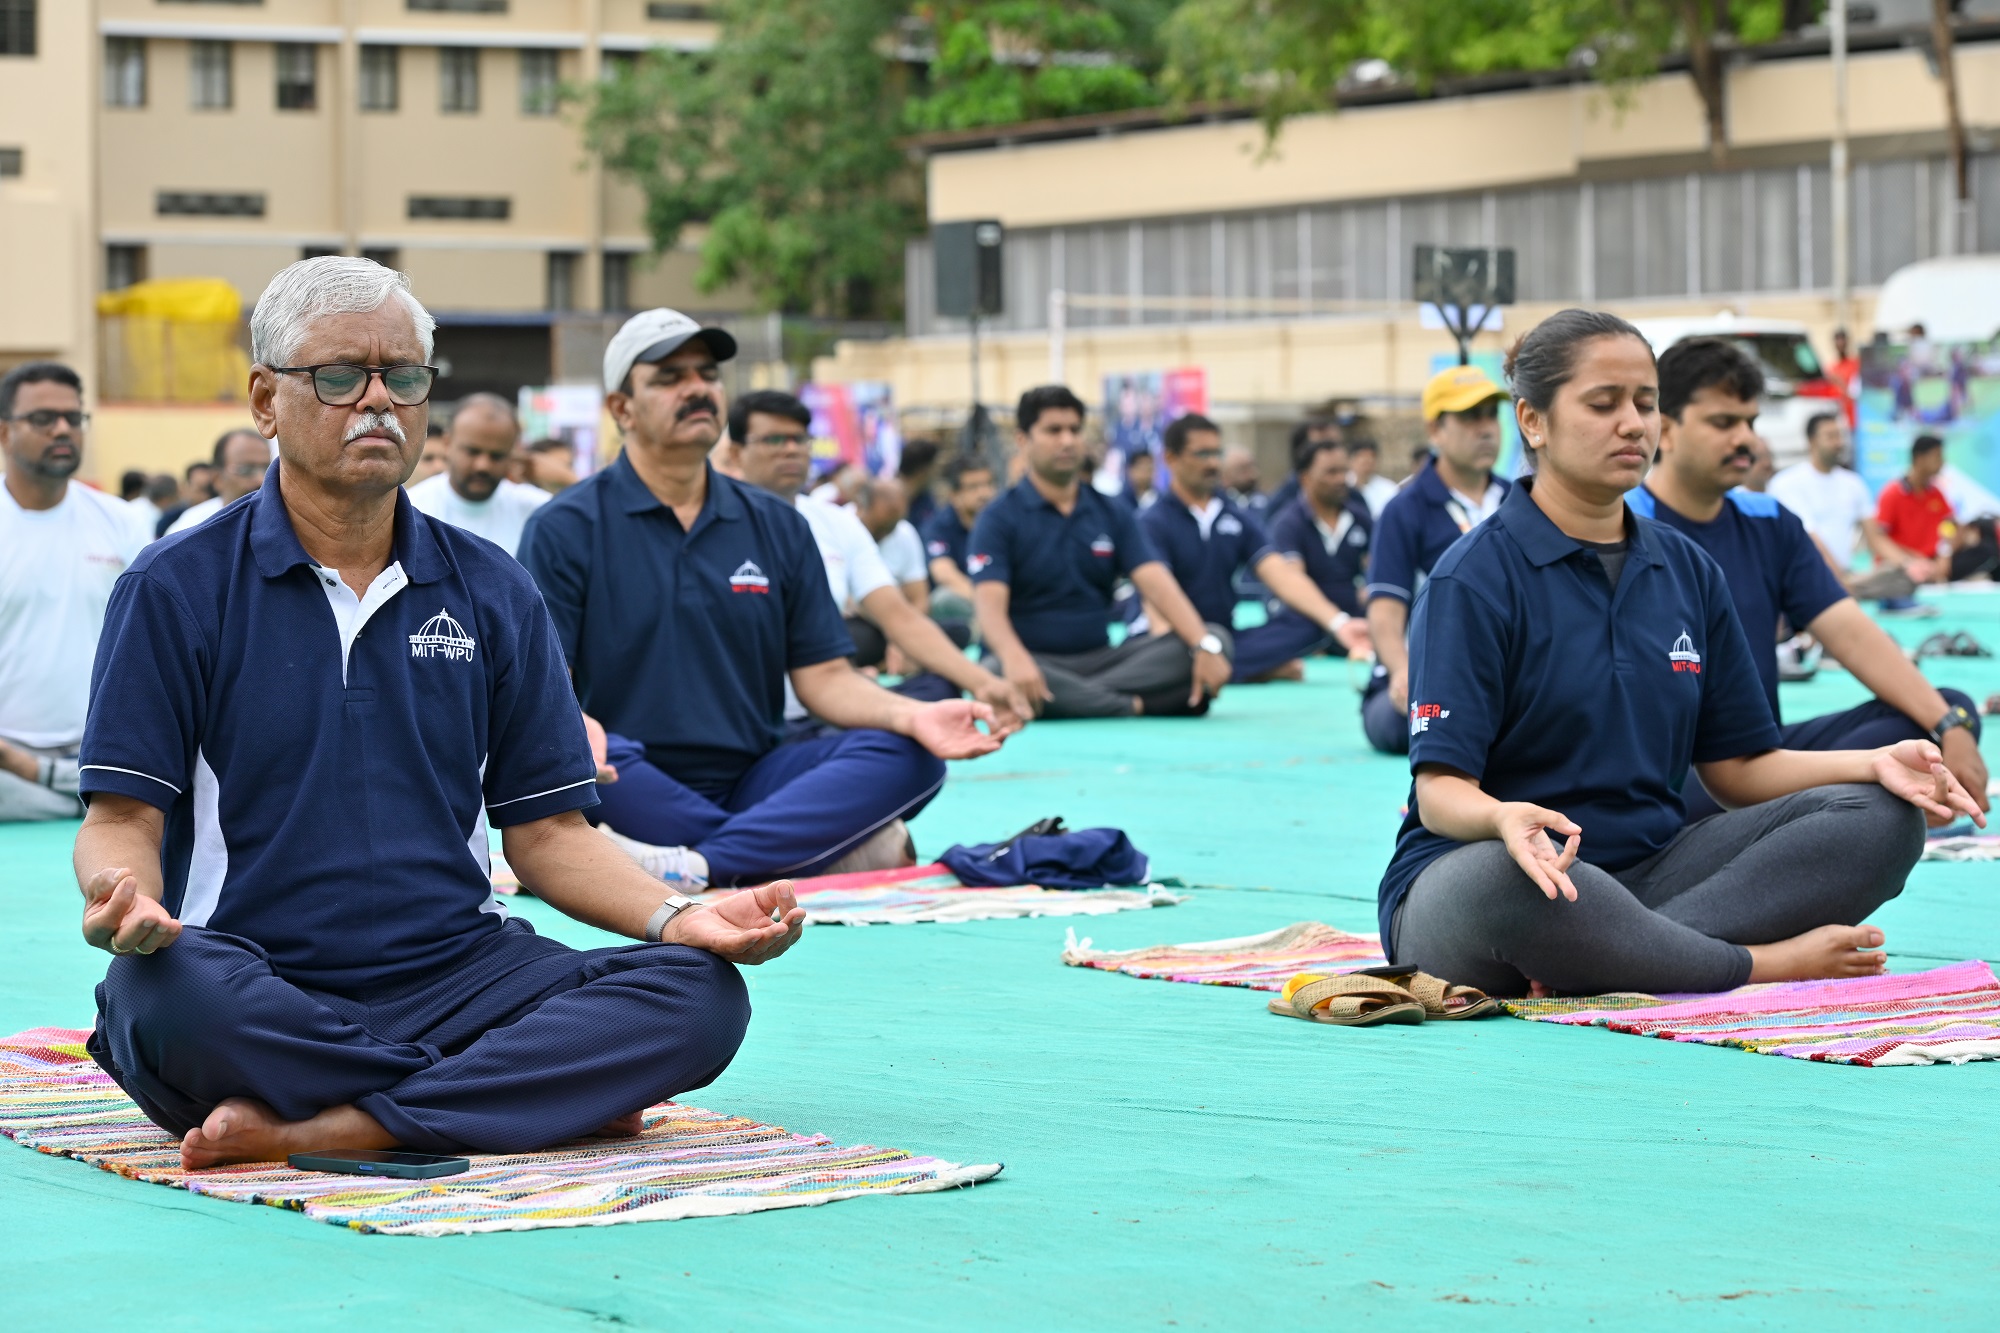 Yoga for Humanity celebrated by MIT WPU on International Day of Yoga